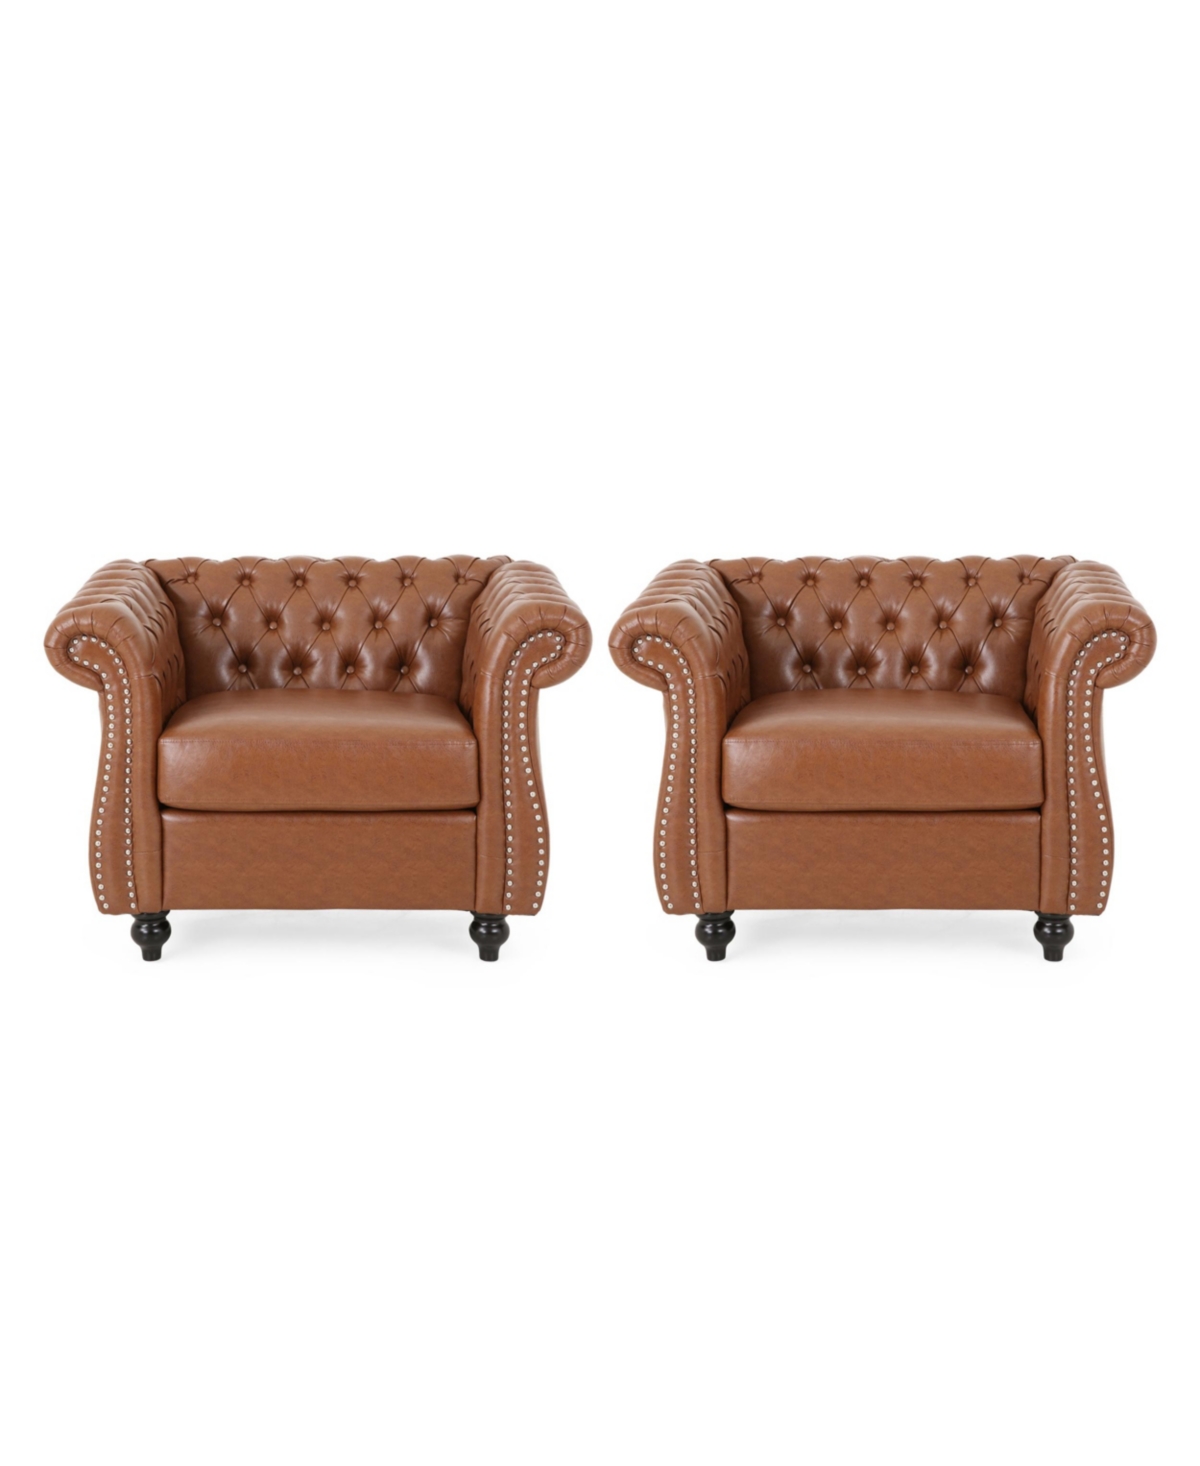 Noble House Silverdale Traditional Chesterfield Club Chairs Set, 2 Piece In Cognac Brown